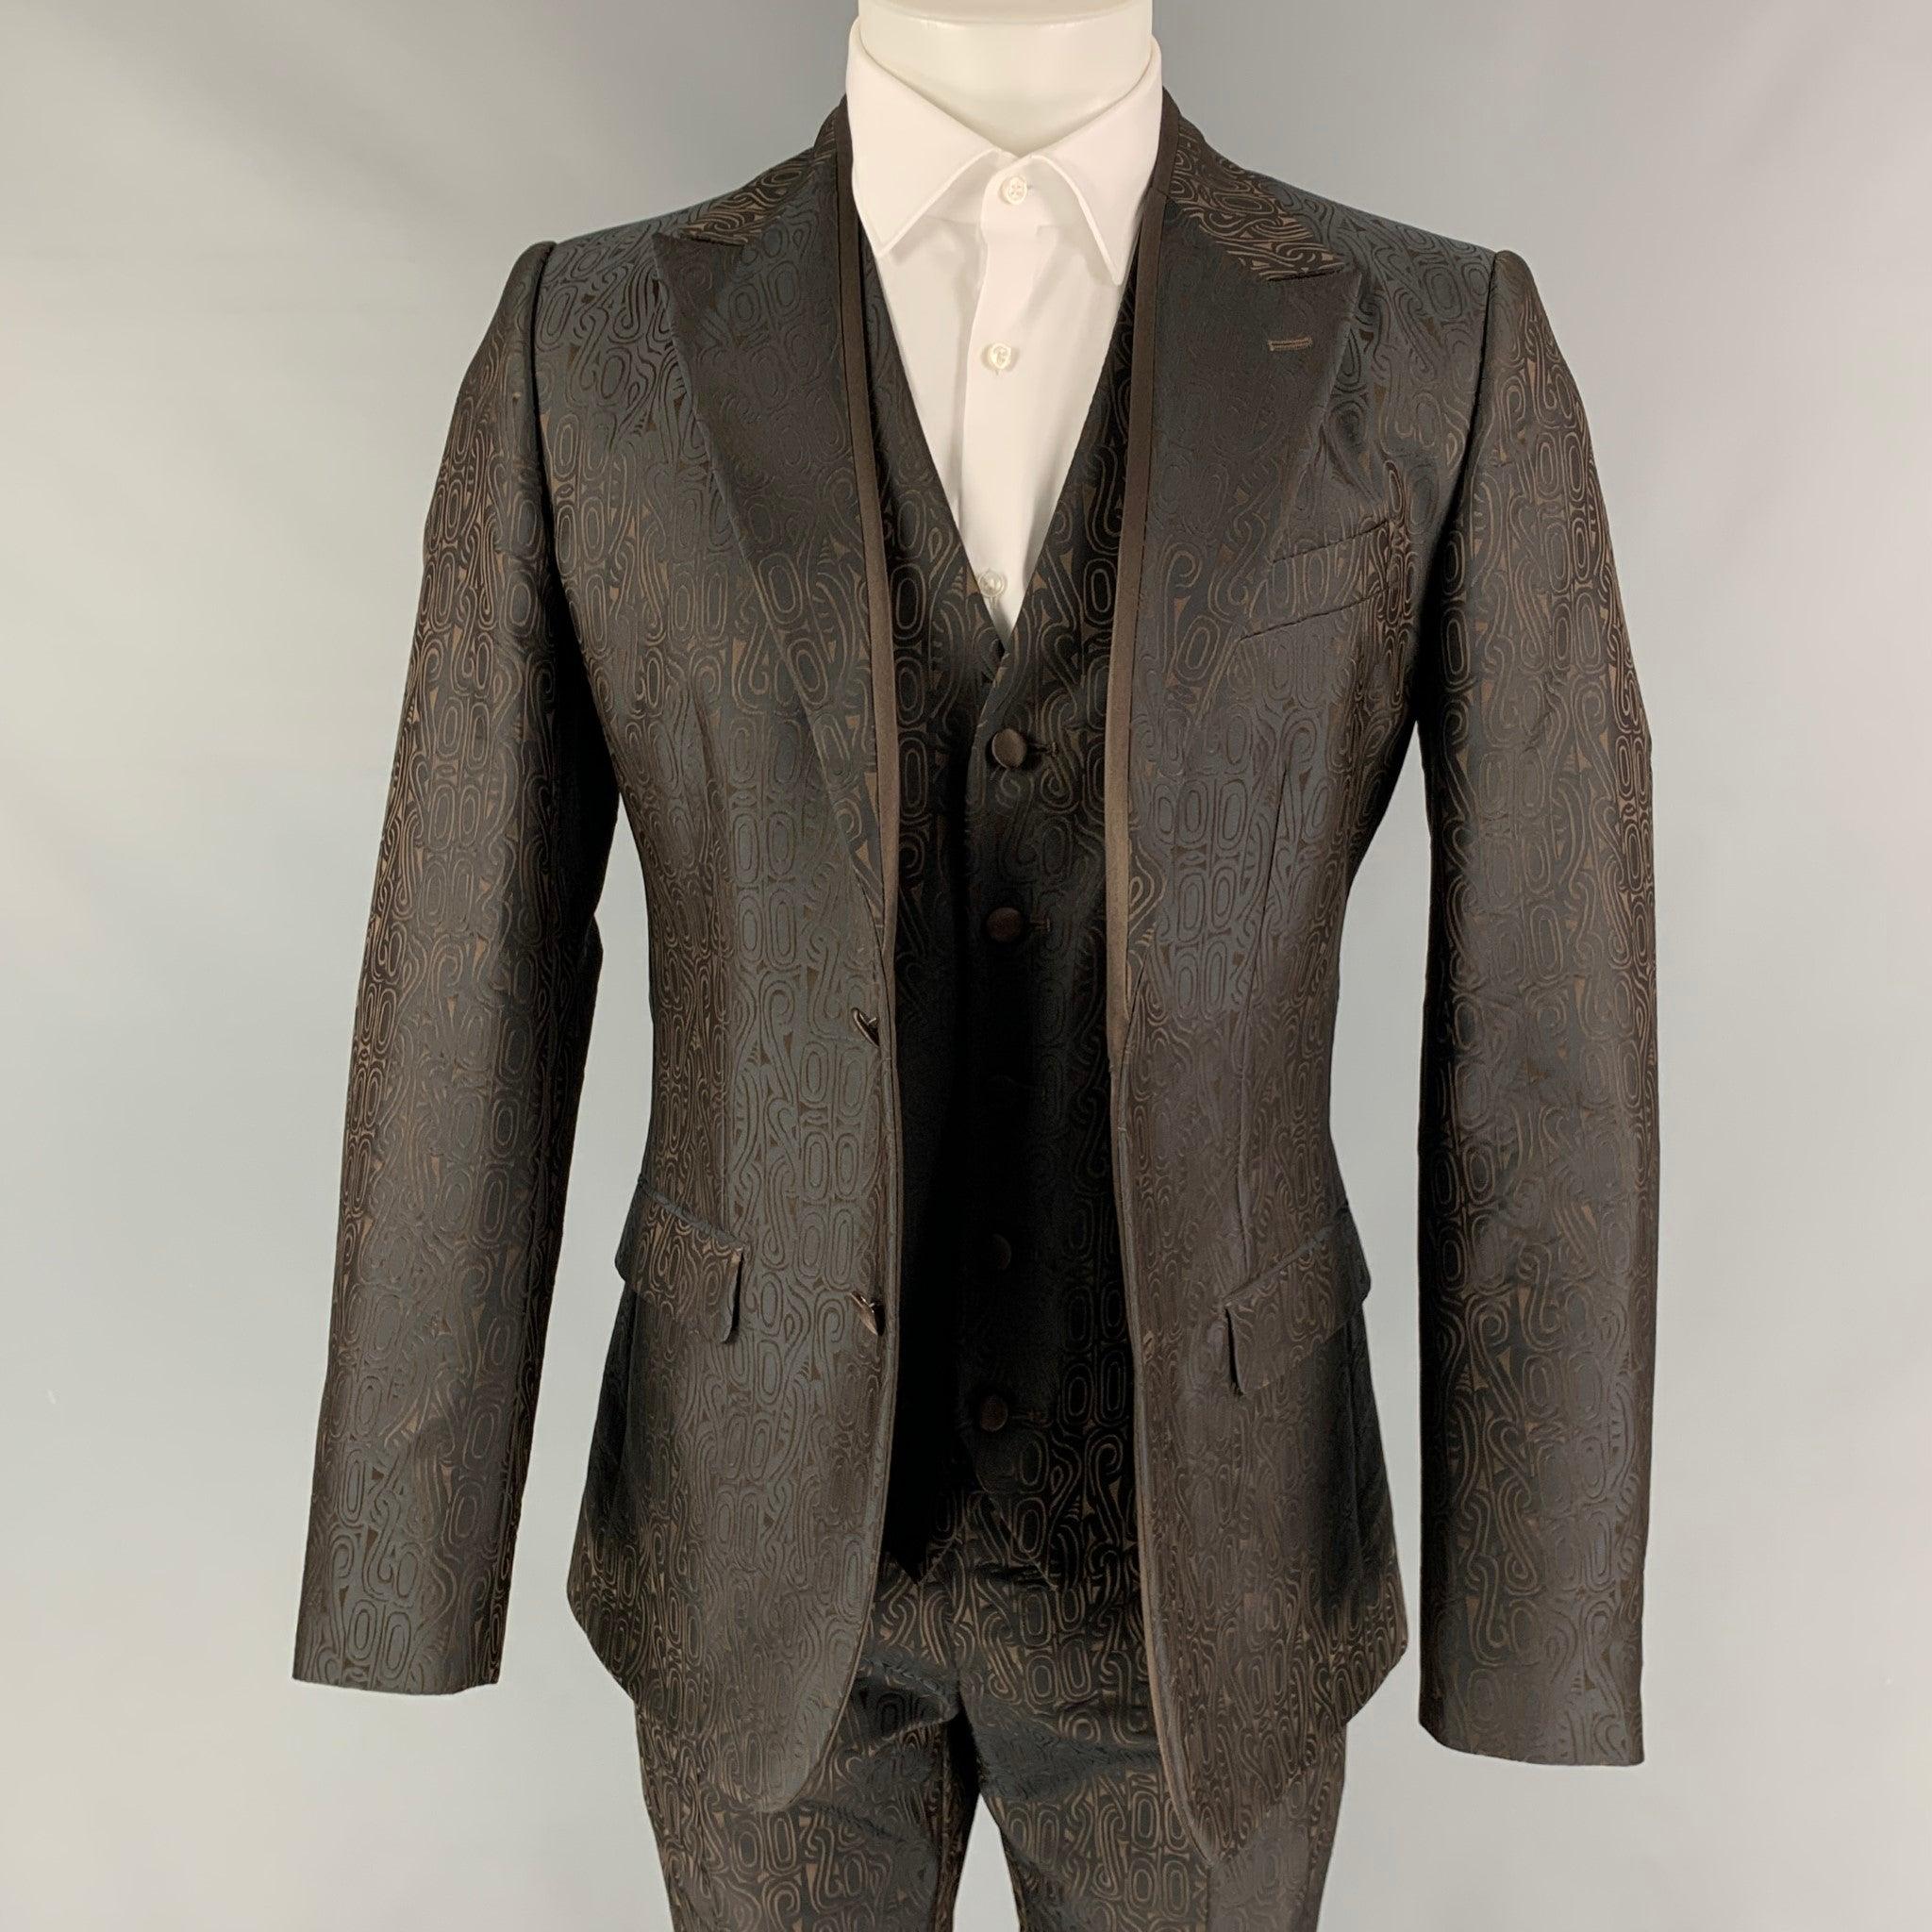 DOLCE & GABBANA 3 Piece
suit comes in a brown geometric polyester / silk with a full liner and includes a single breasted, double button sport coat with a peak lapel and matching flat front trousers. Waist and length of pants need to be altered to